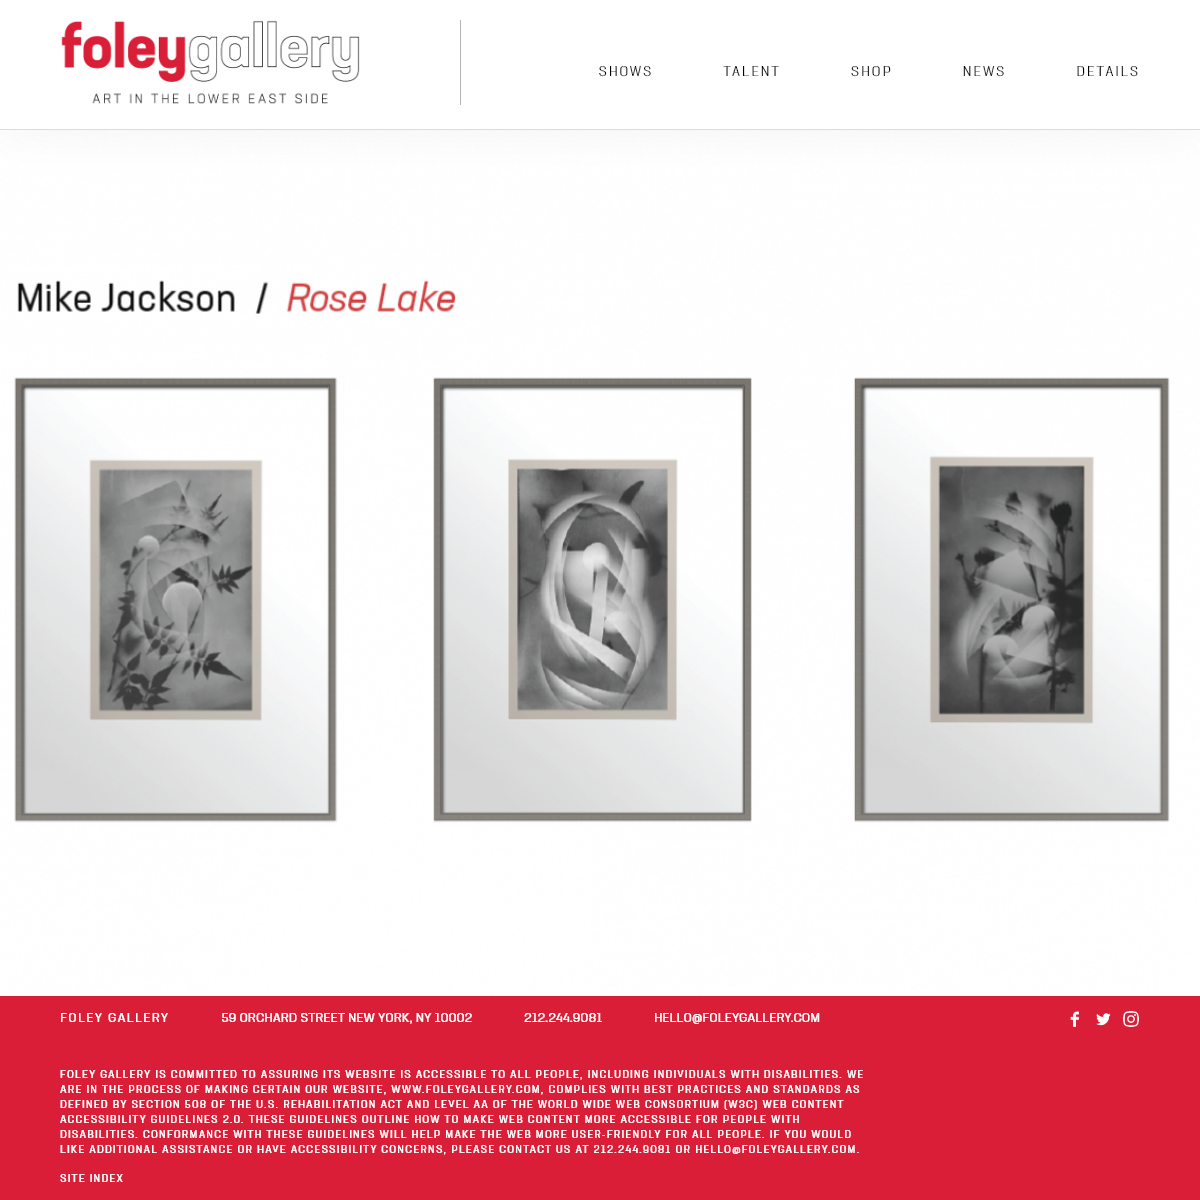 A complete backup of foleygallery.com